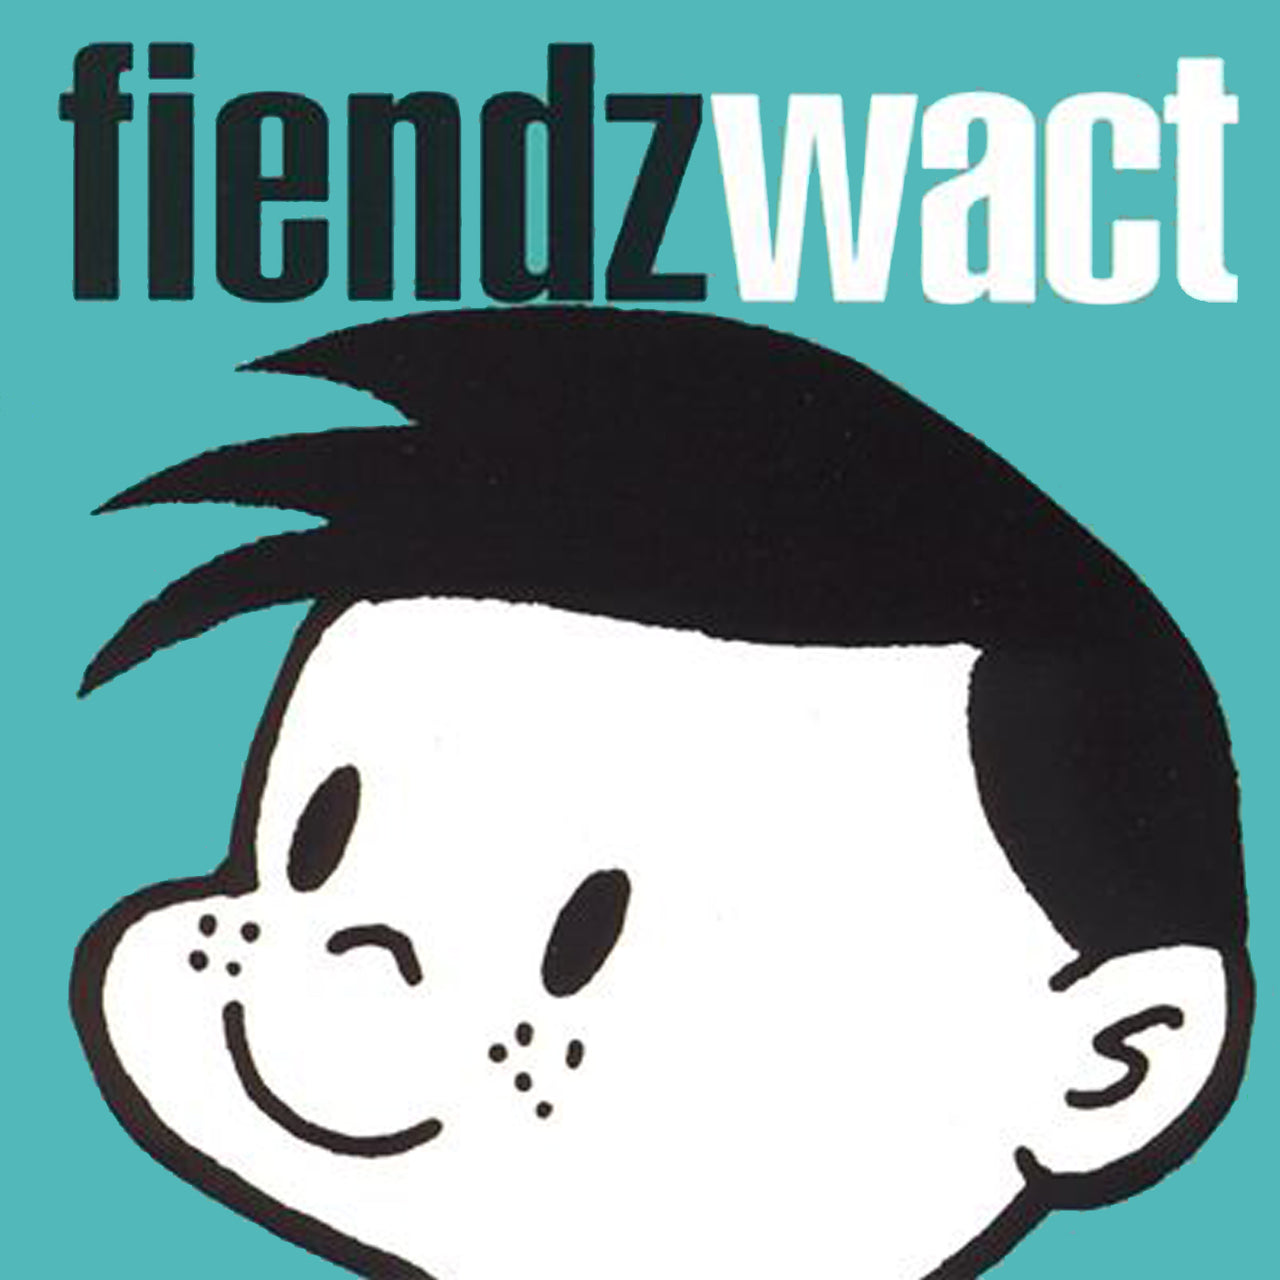 THE FIENDZ - "WACT" CD - INTO THE VOID Merch Co.